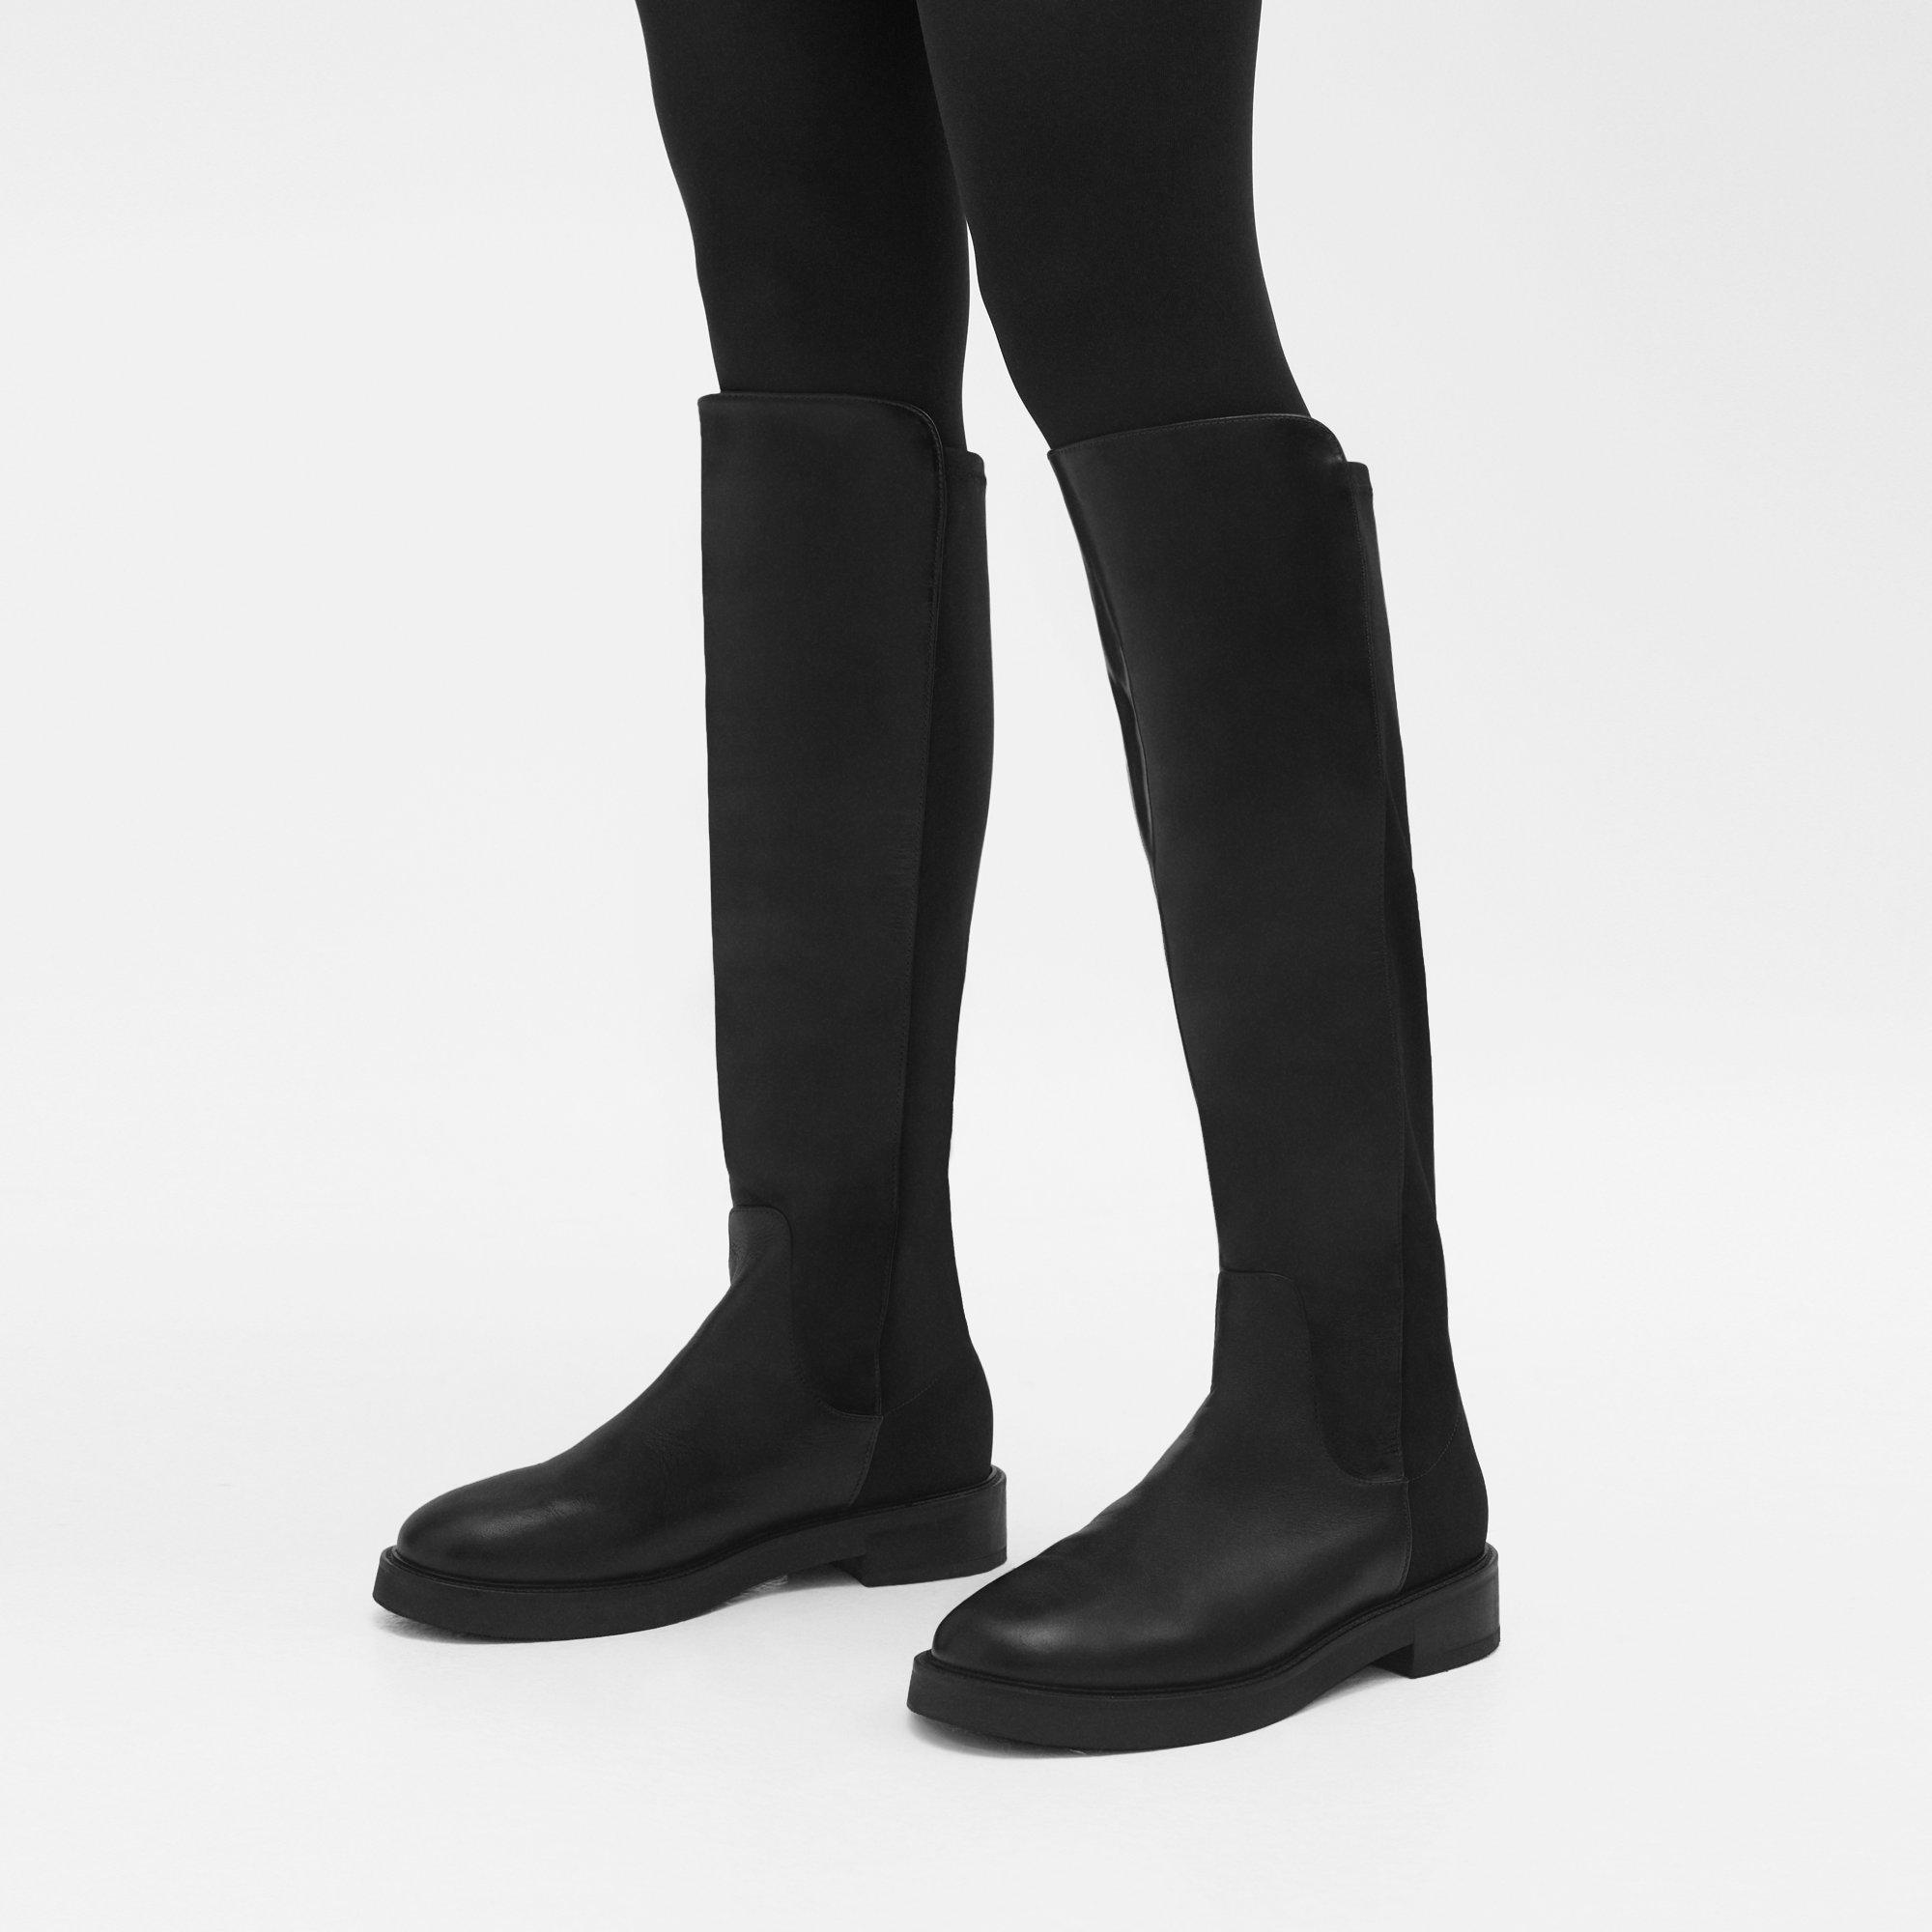 Whitney leather over-the-knee boots